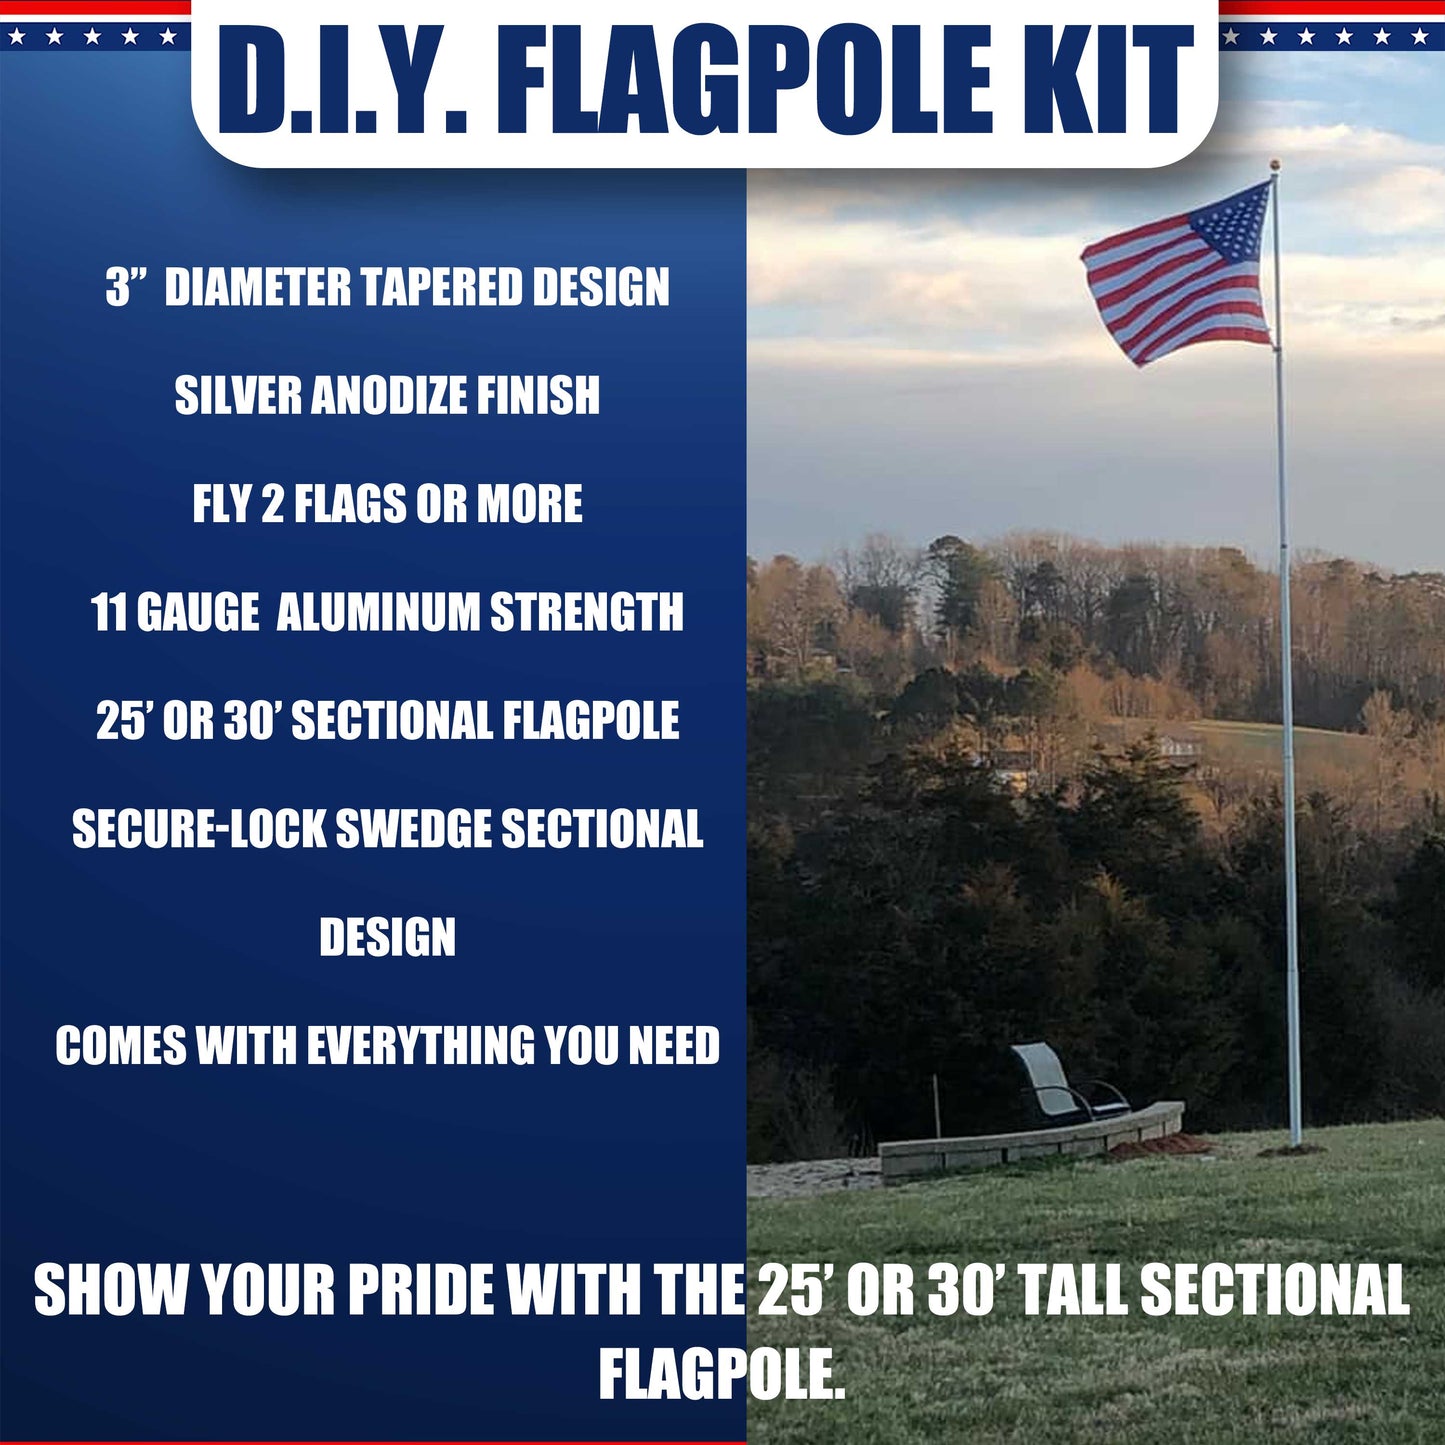 Service First™ Sectional Flag Pole Kit